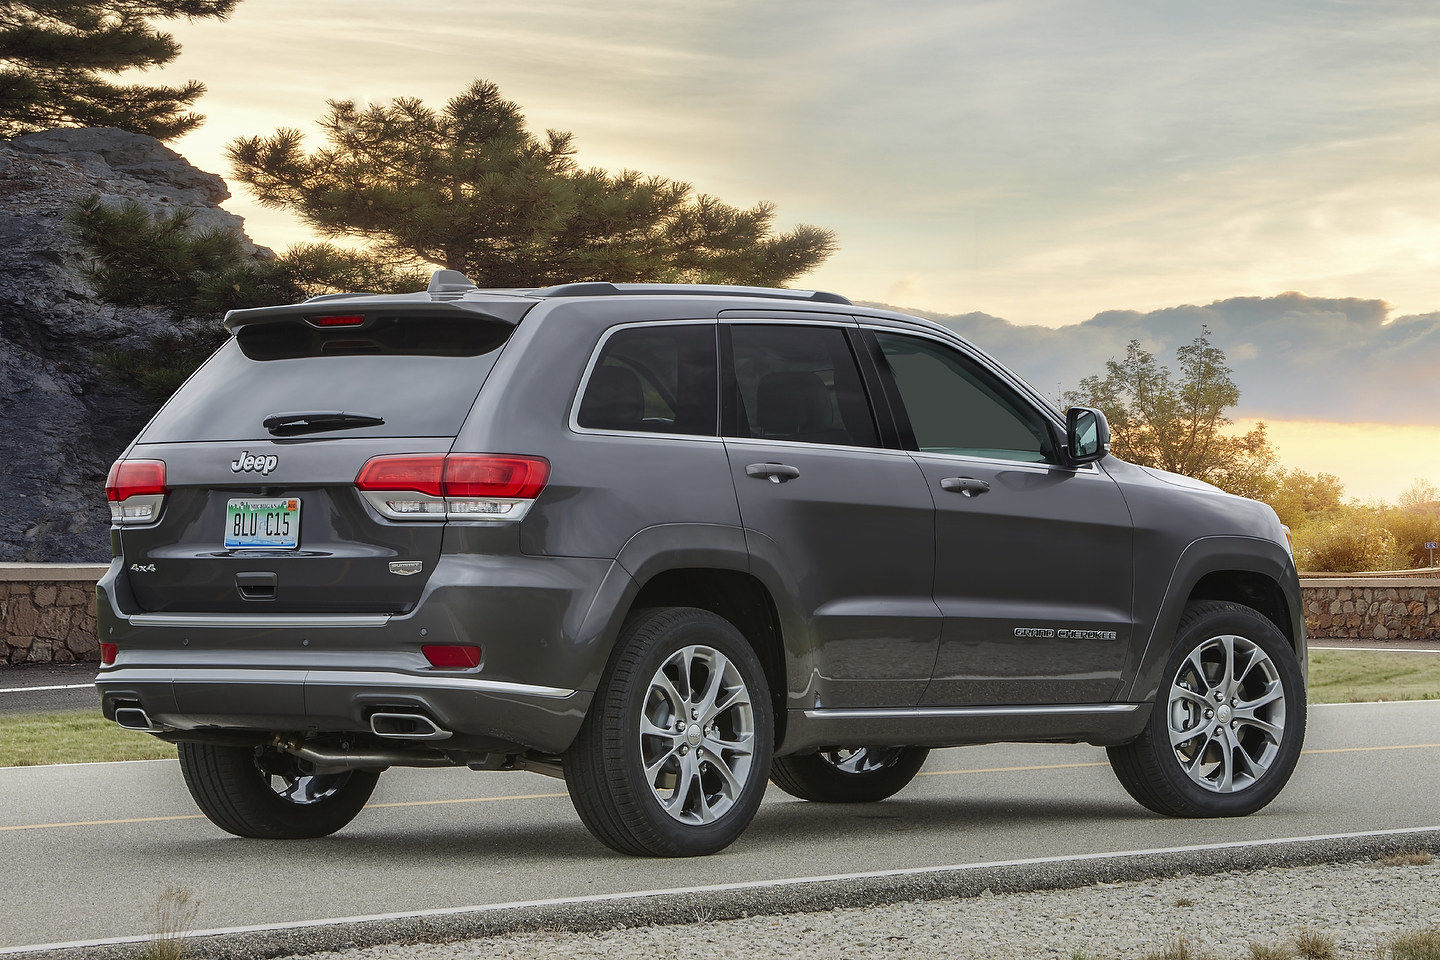 2021 Jeep Grand Cherokee vs 2021 Toyota Highlander: Performance paired with luxury